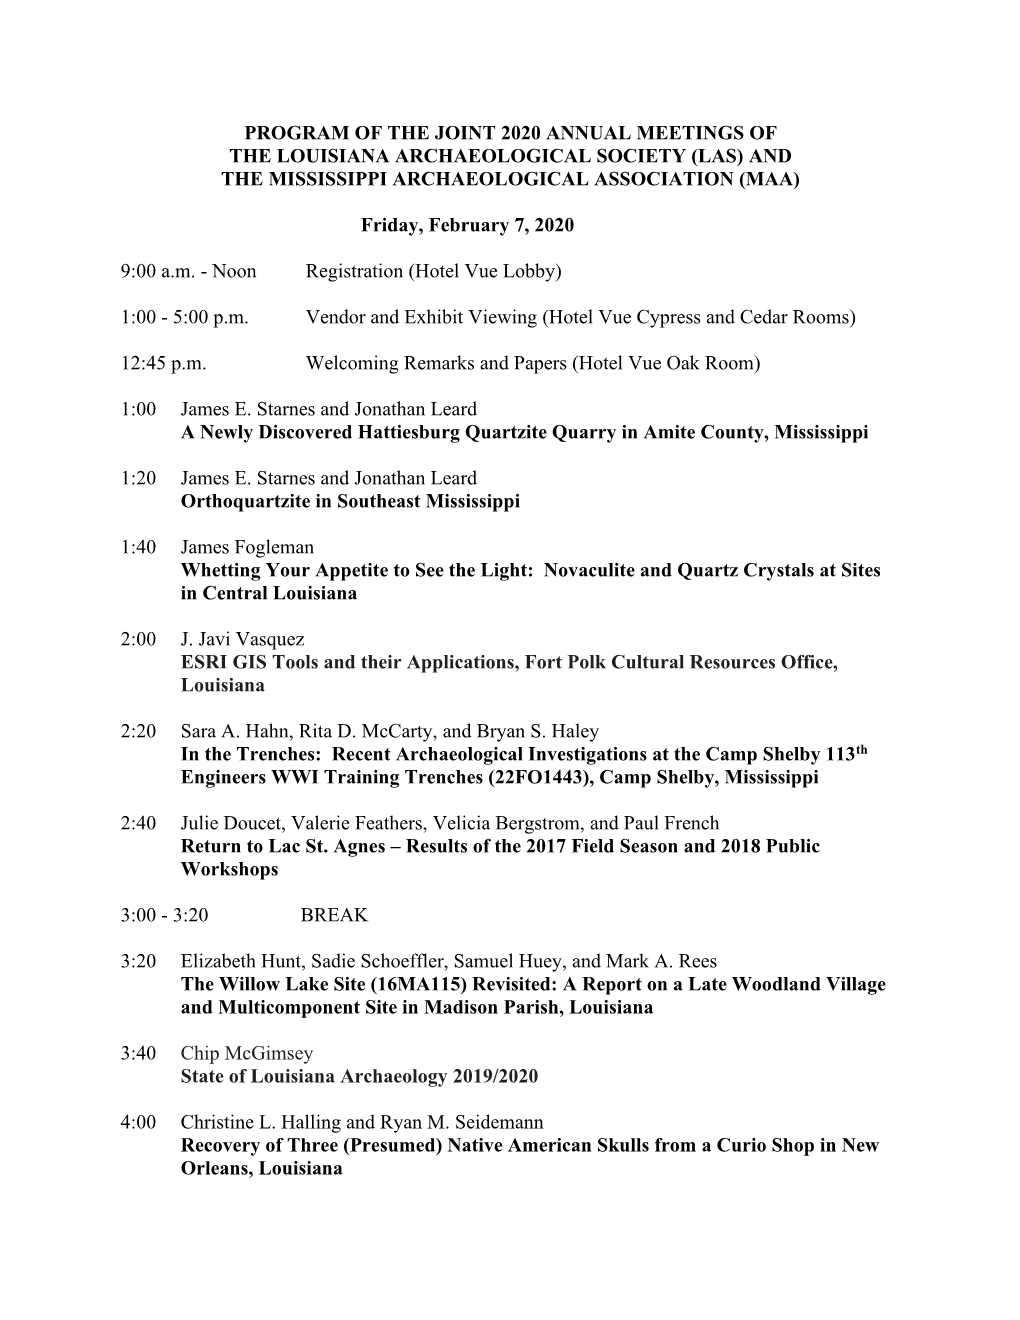 Program of the Joint 2020 Annual Meetings of the Louisiana Archaeological Society (Las) and the Mississippi Archaeological Association (Maa)